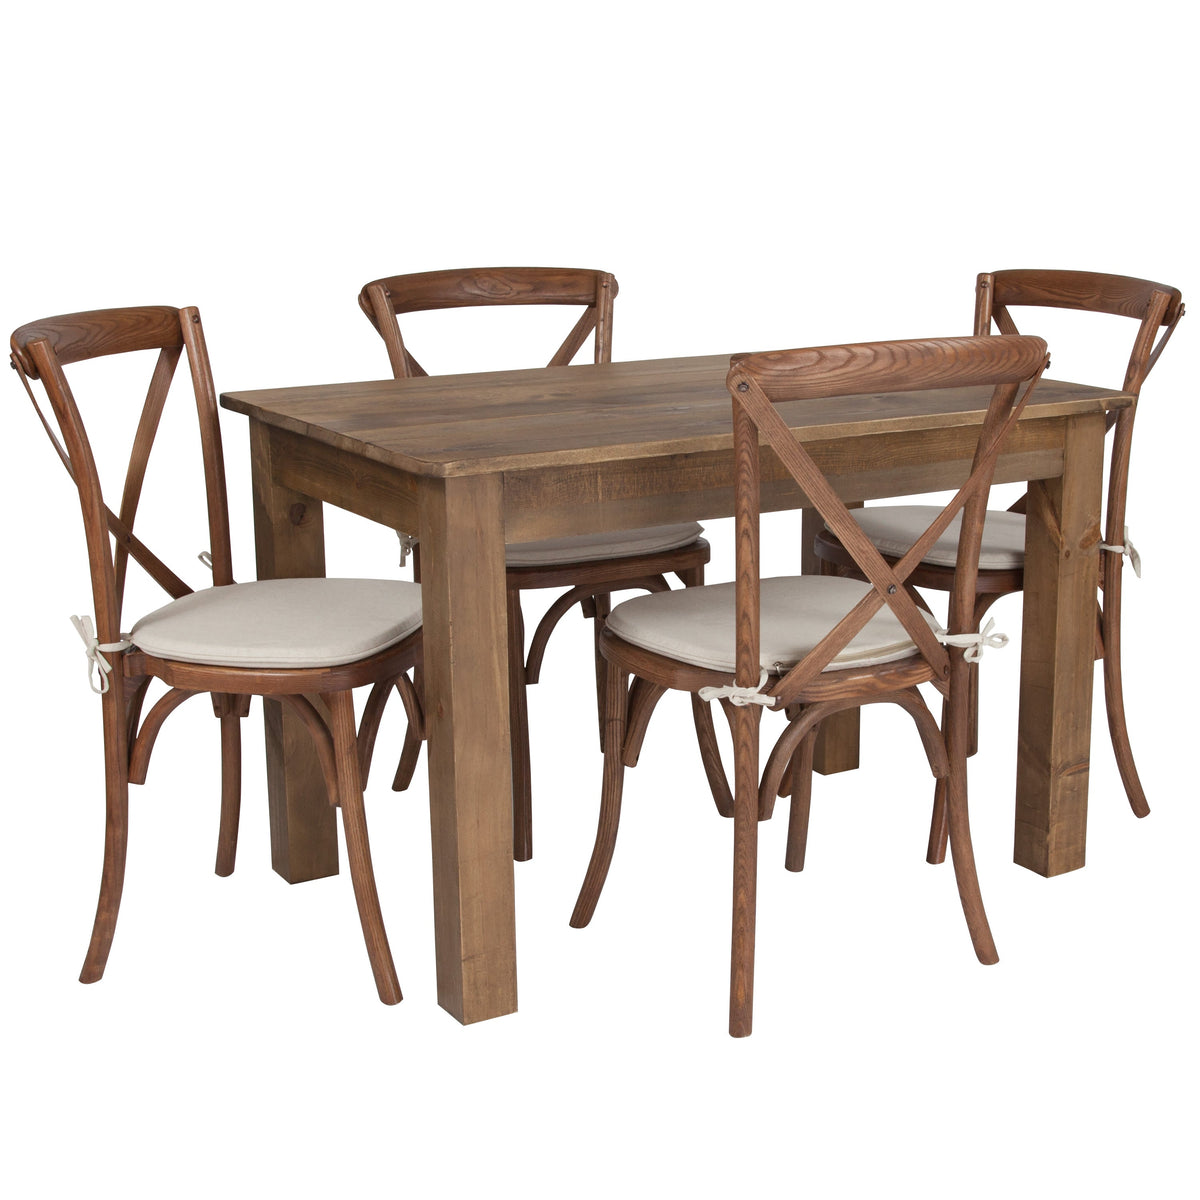 46inch x 30inch Antique Rustic Farm Table Set with 4 Cross Back Chairs and Cushions